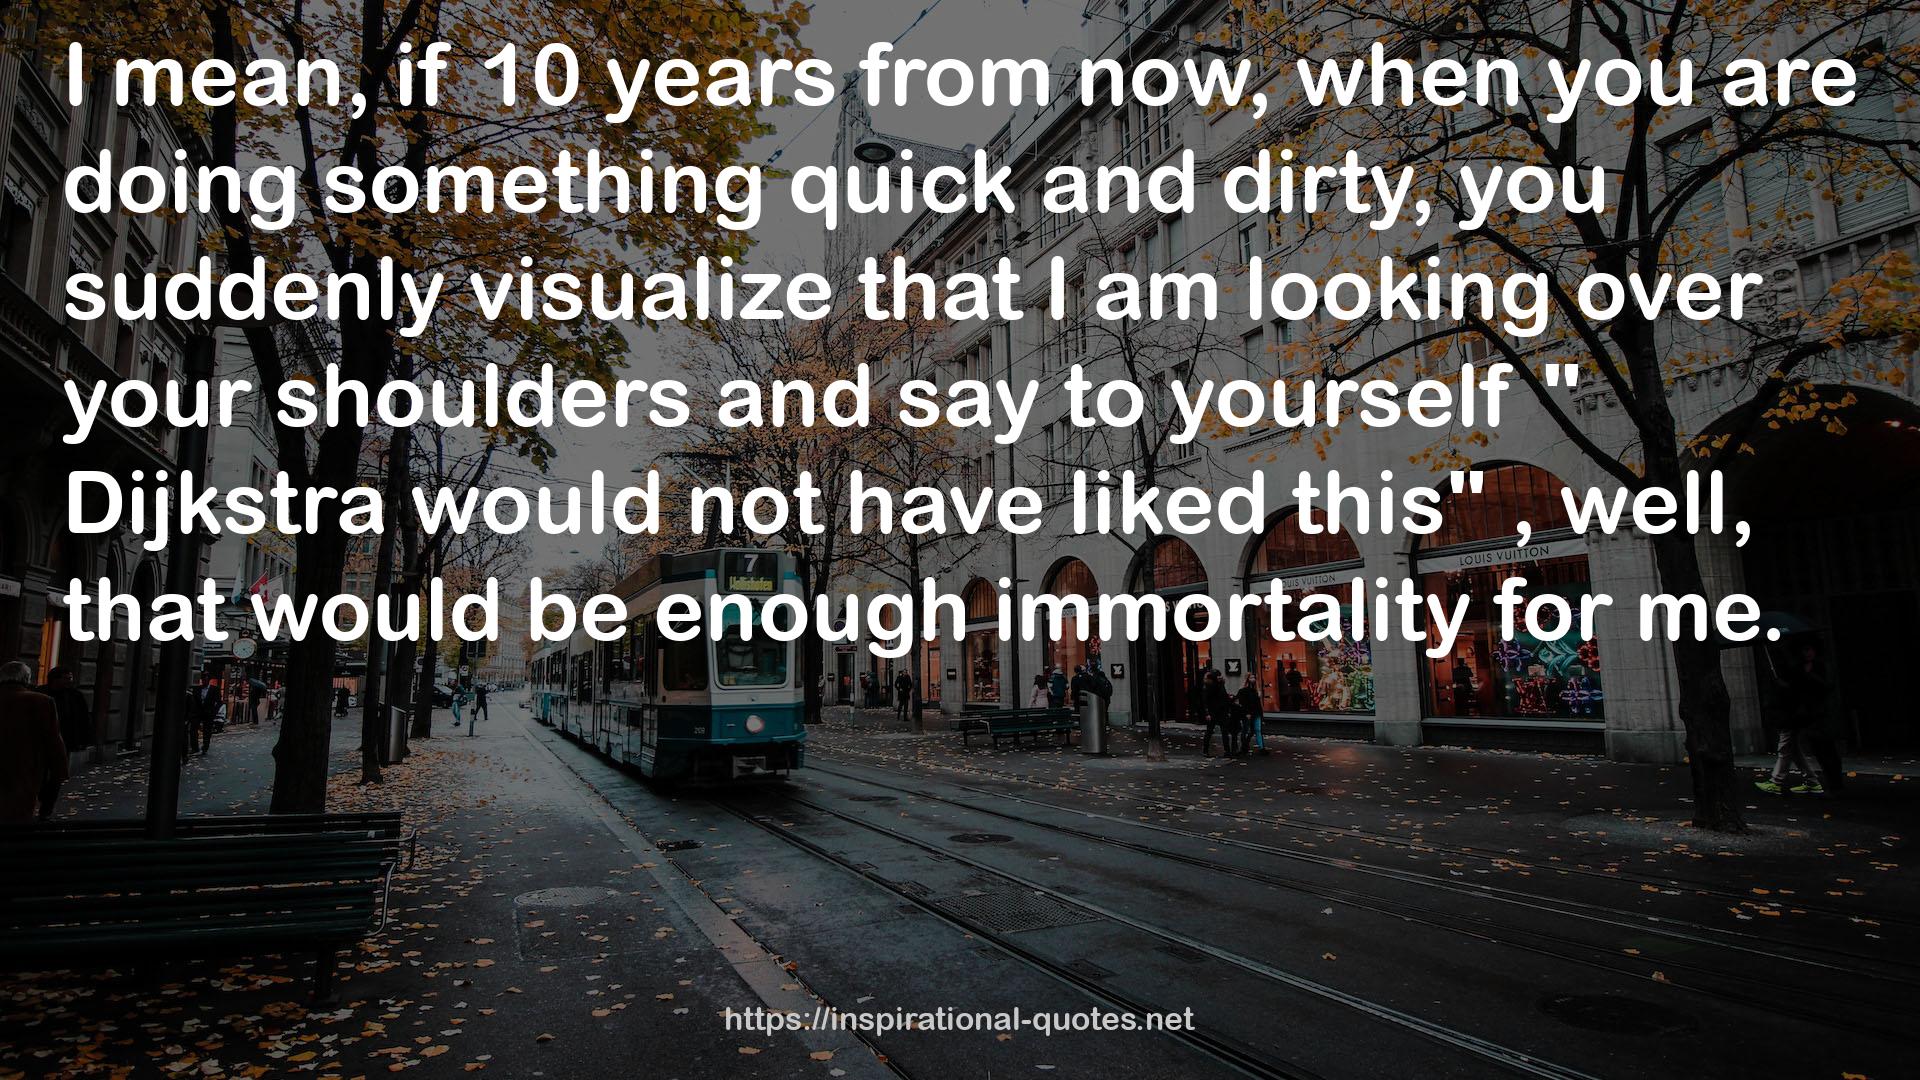 enough immortality  QUOTES